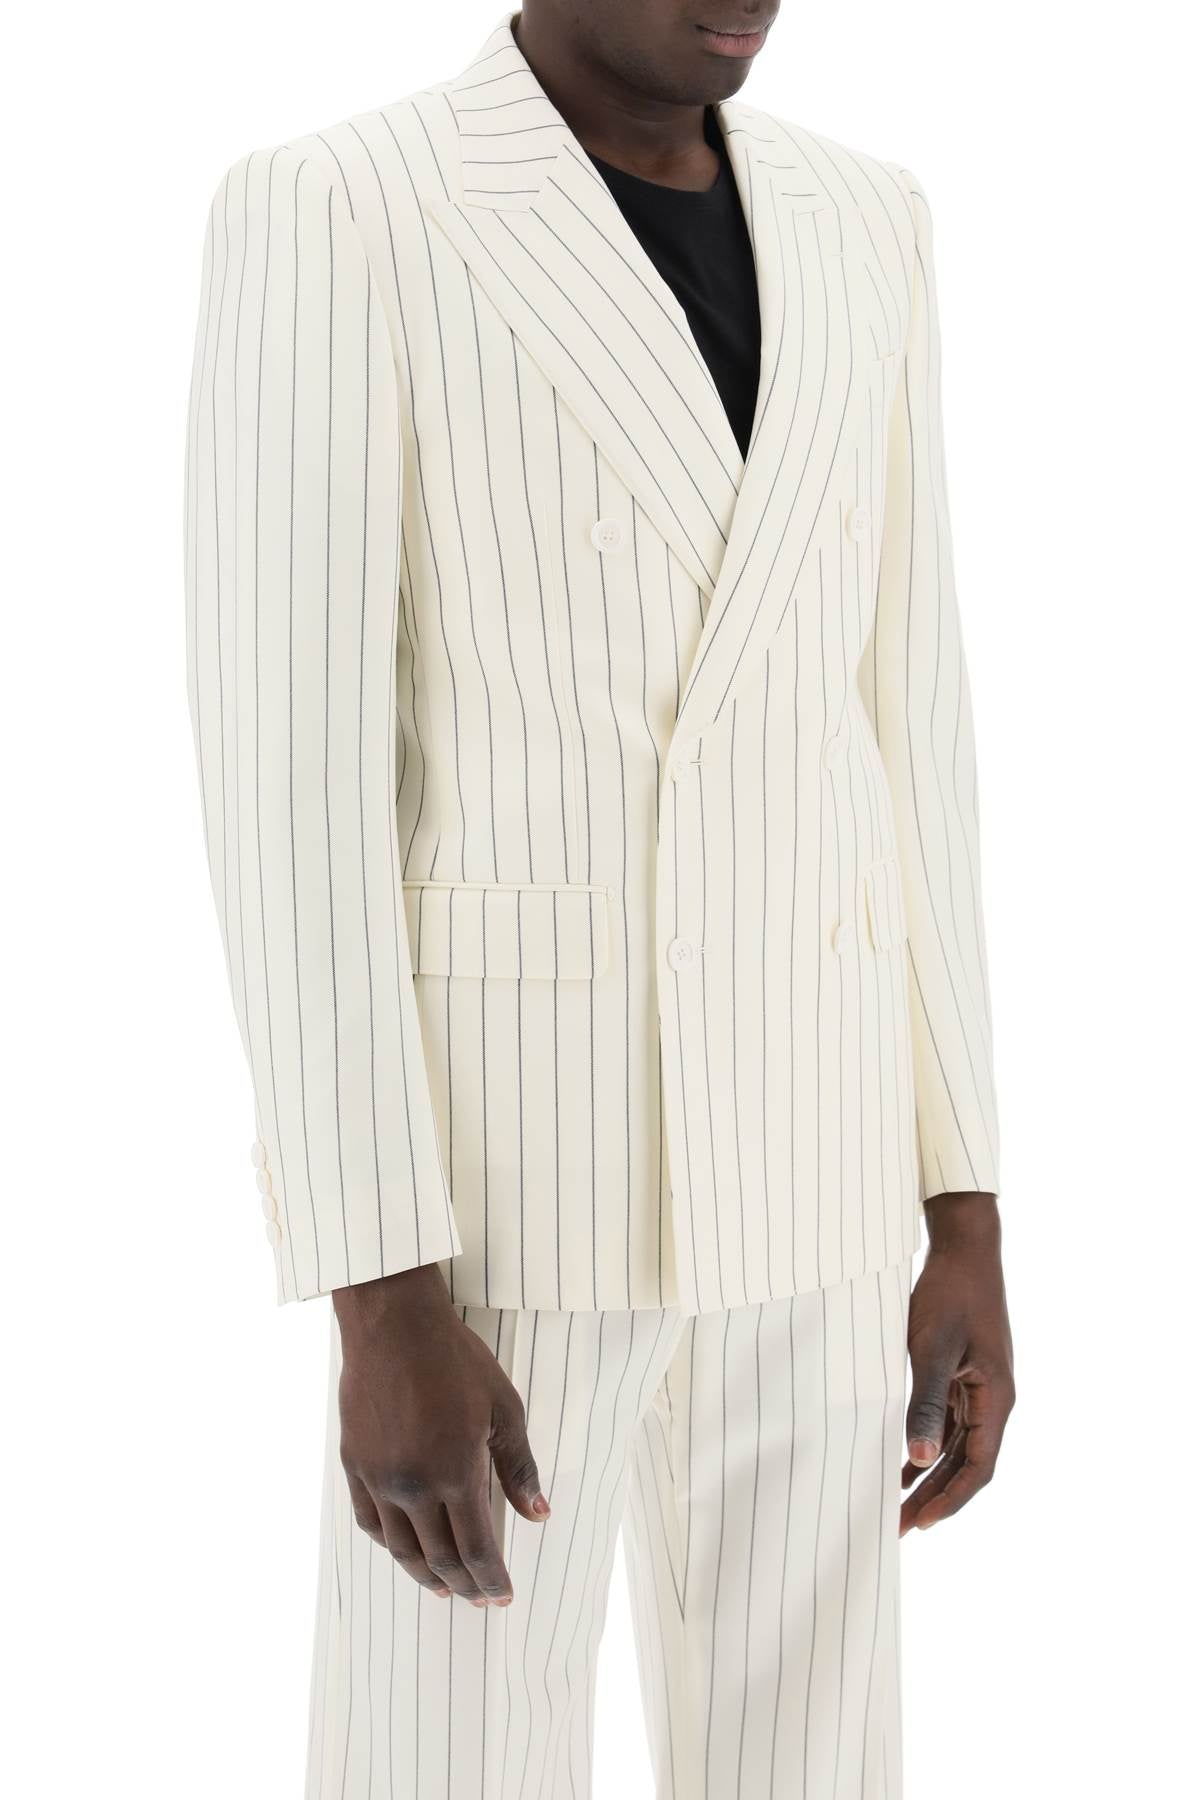 Dolce & gabbana double-breasted pinstripe-1